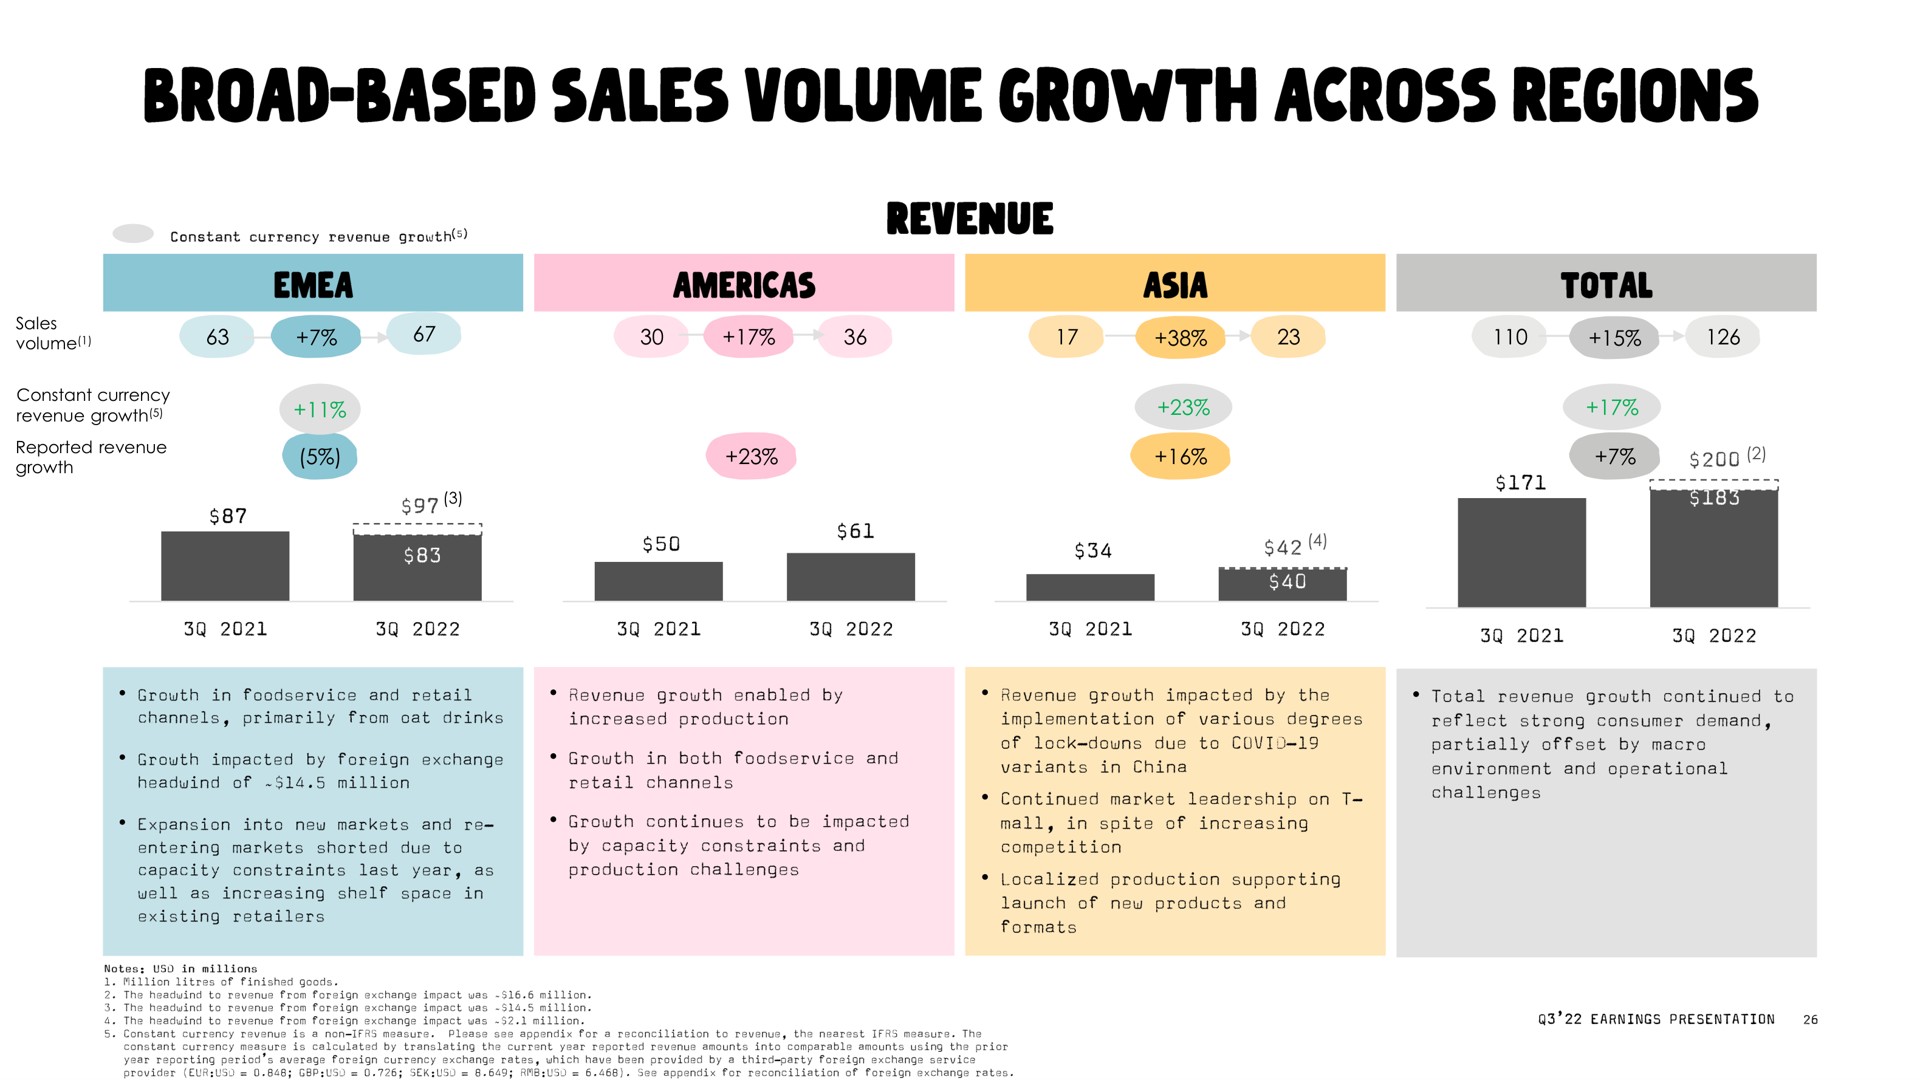 sales volume constant currency revenue growth reported revenue growth | Oatly